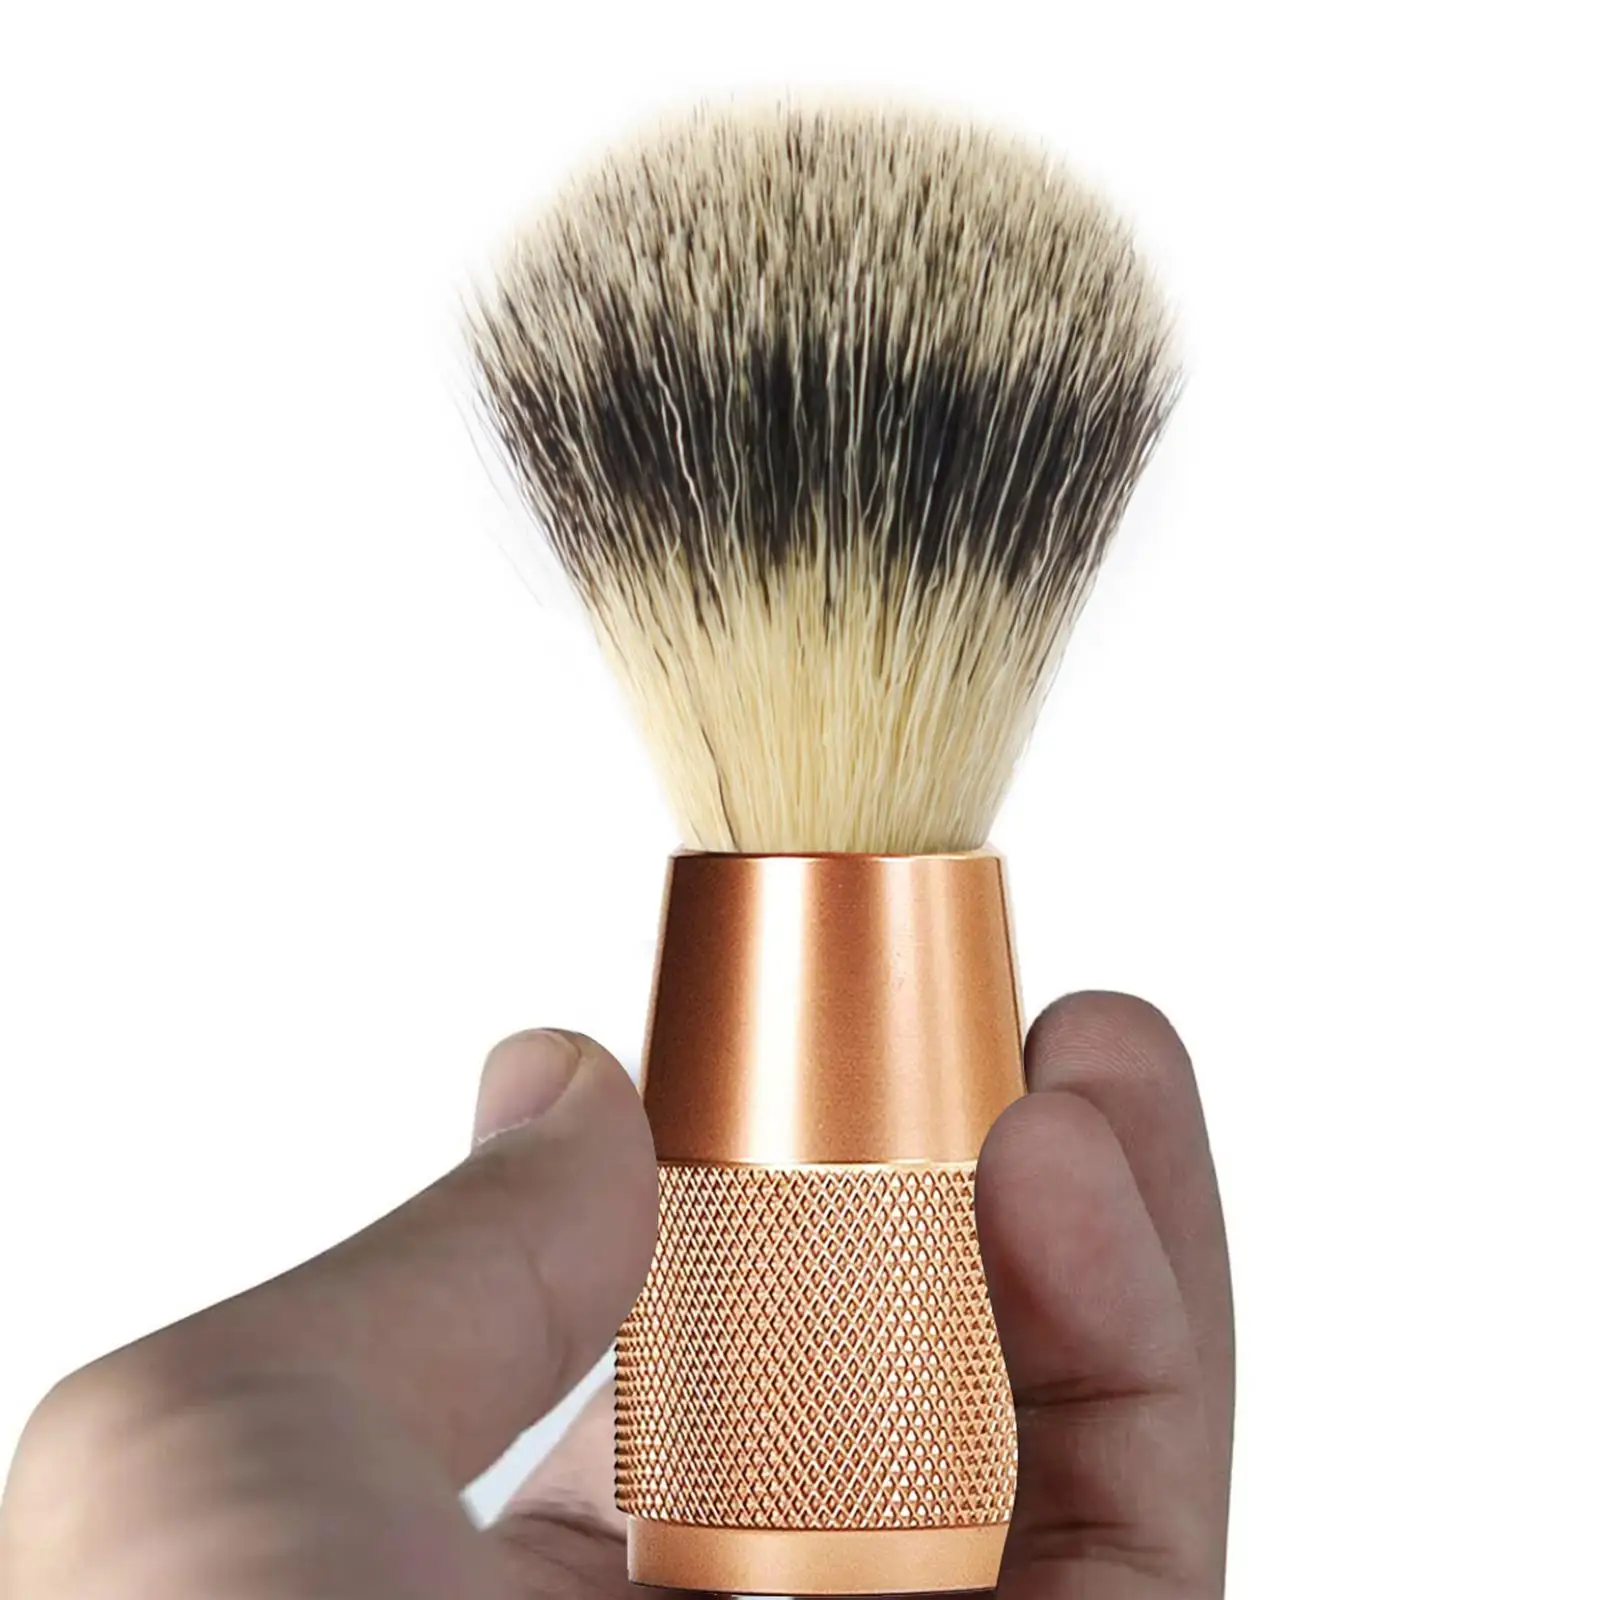 Shaving Brush for Men Handled Accessories for Your Father Husband Comfortable Length 4.3inch Shave Cream Brush Metal Handle